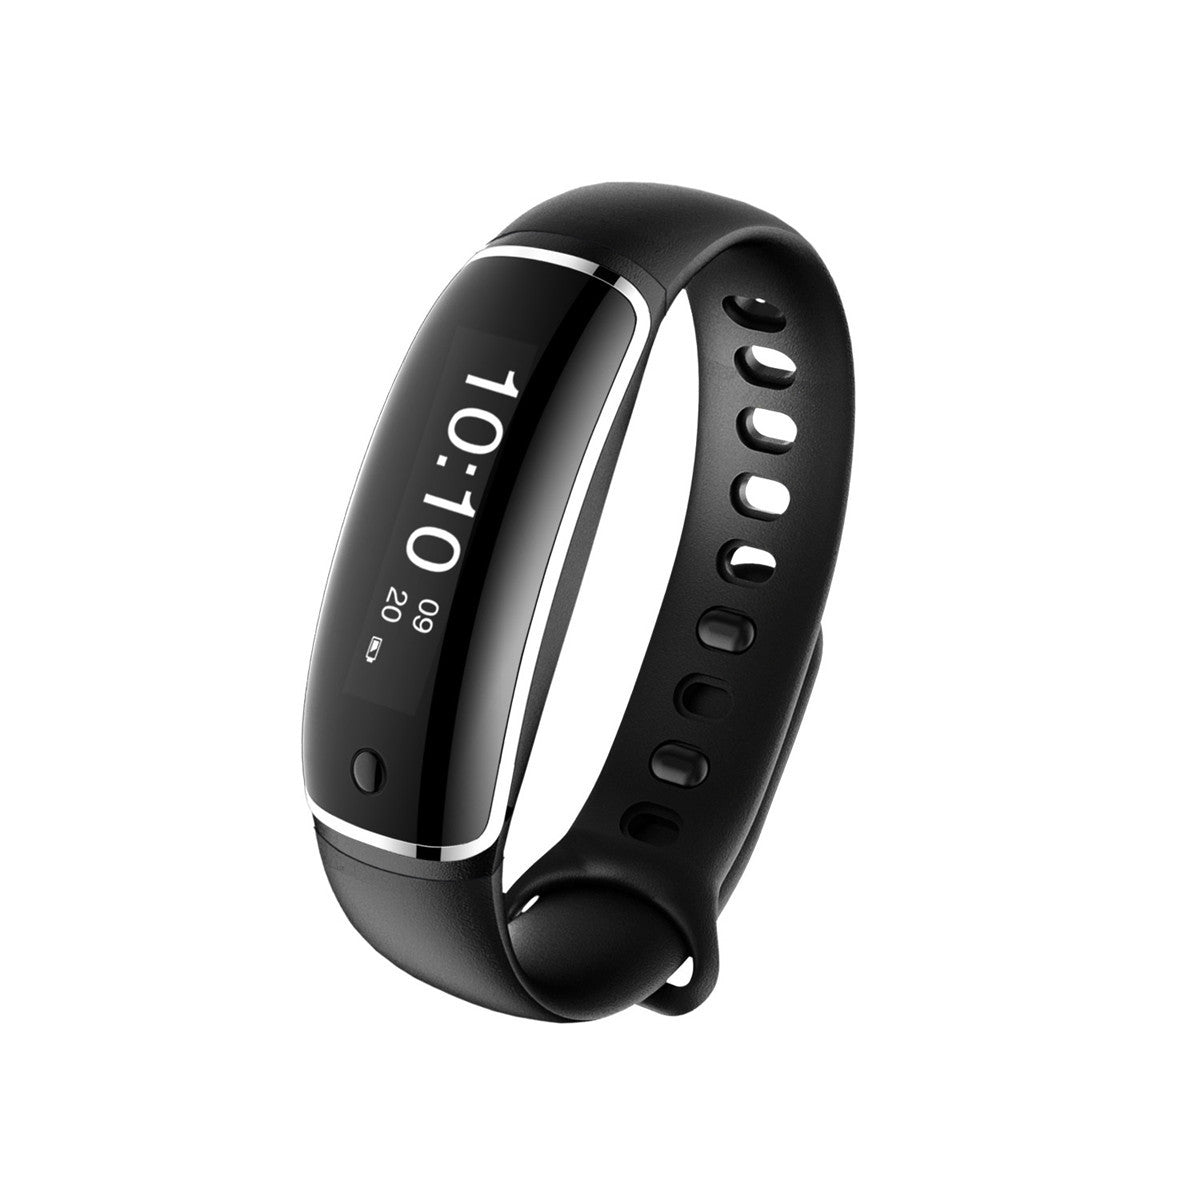 Bakeey M4 Smart Wristband Bracelet Heart Rate Monitor bluetooth 4.0 For Android/ iOS